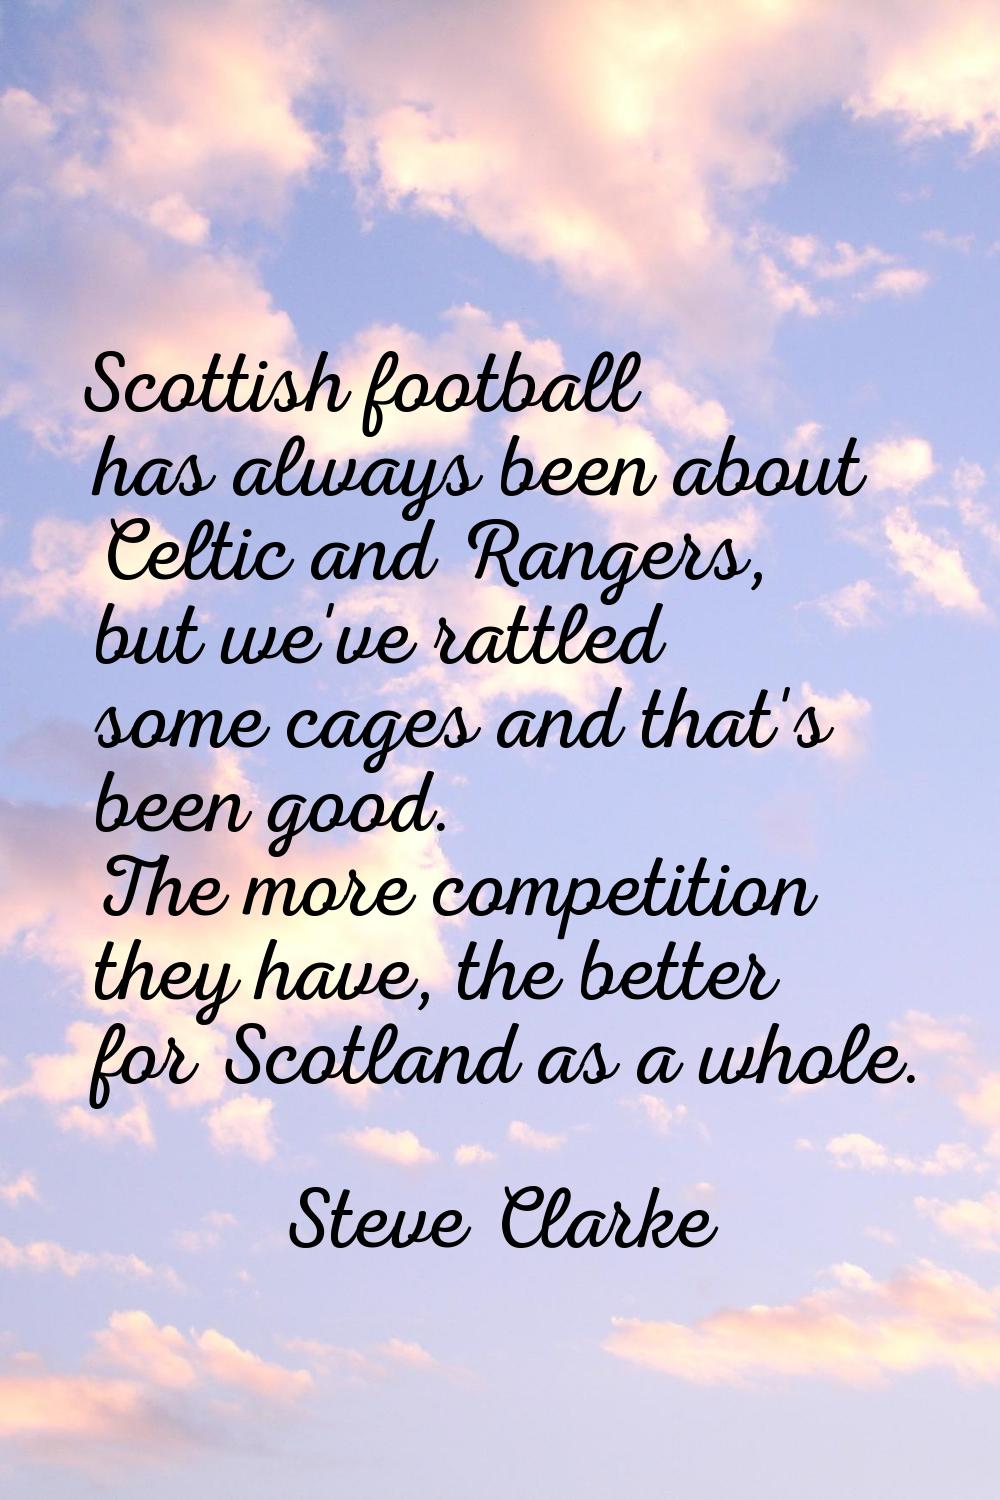 Scottish football has always been about Celtic and Rangers, but we've rattled some cages and that's